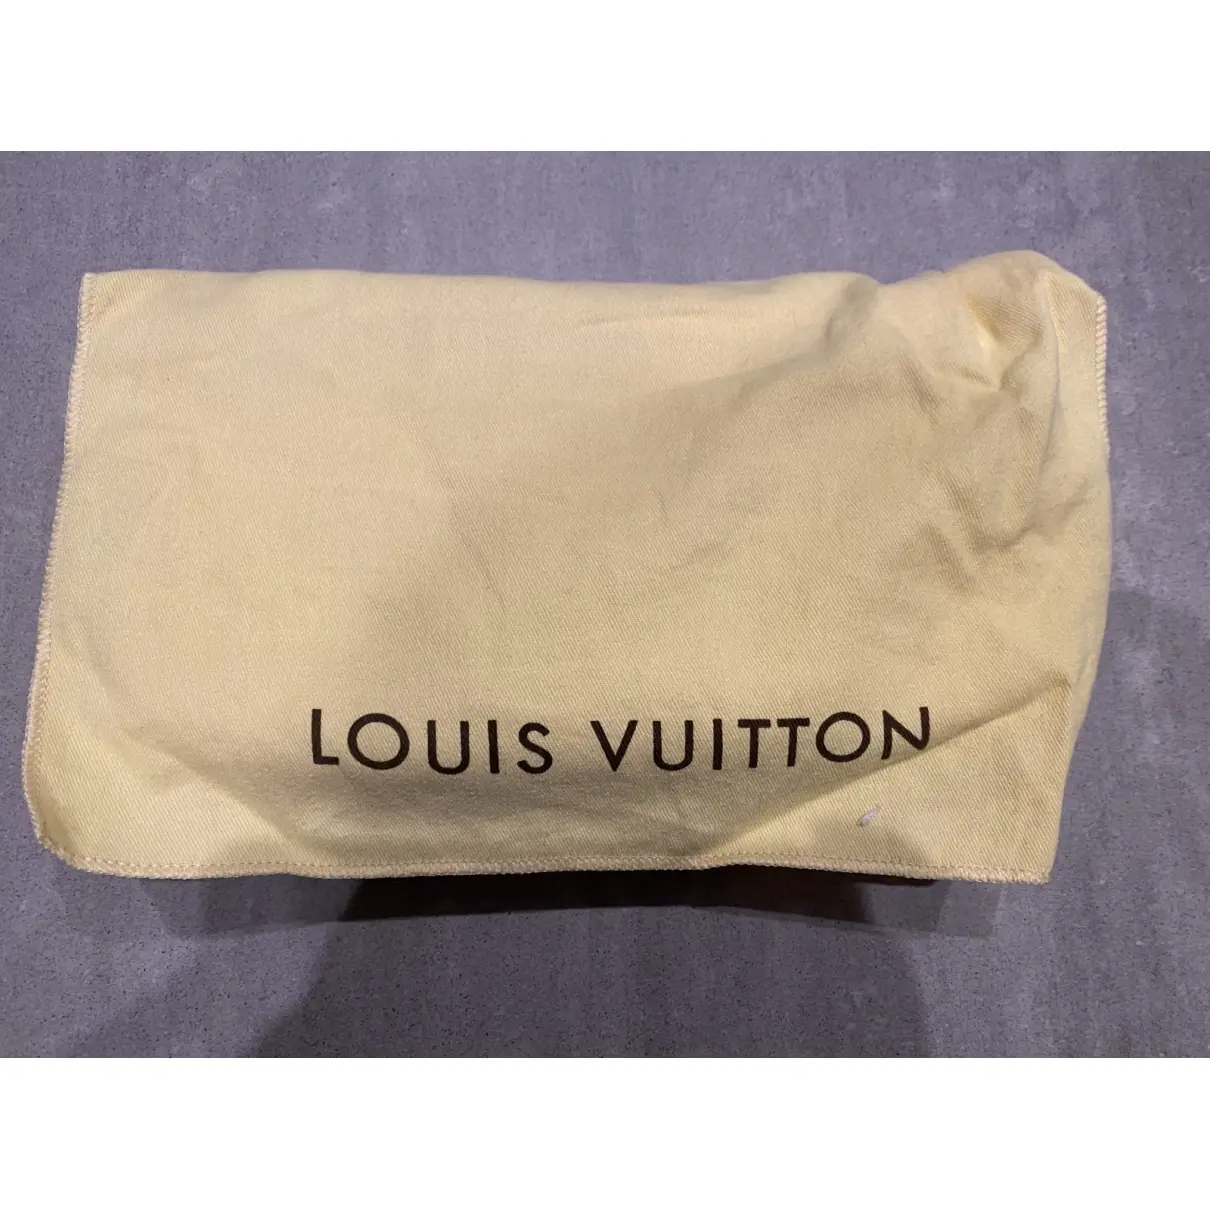 Louis Vuitton Sobe patent leather clutch bag for sale